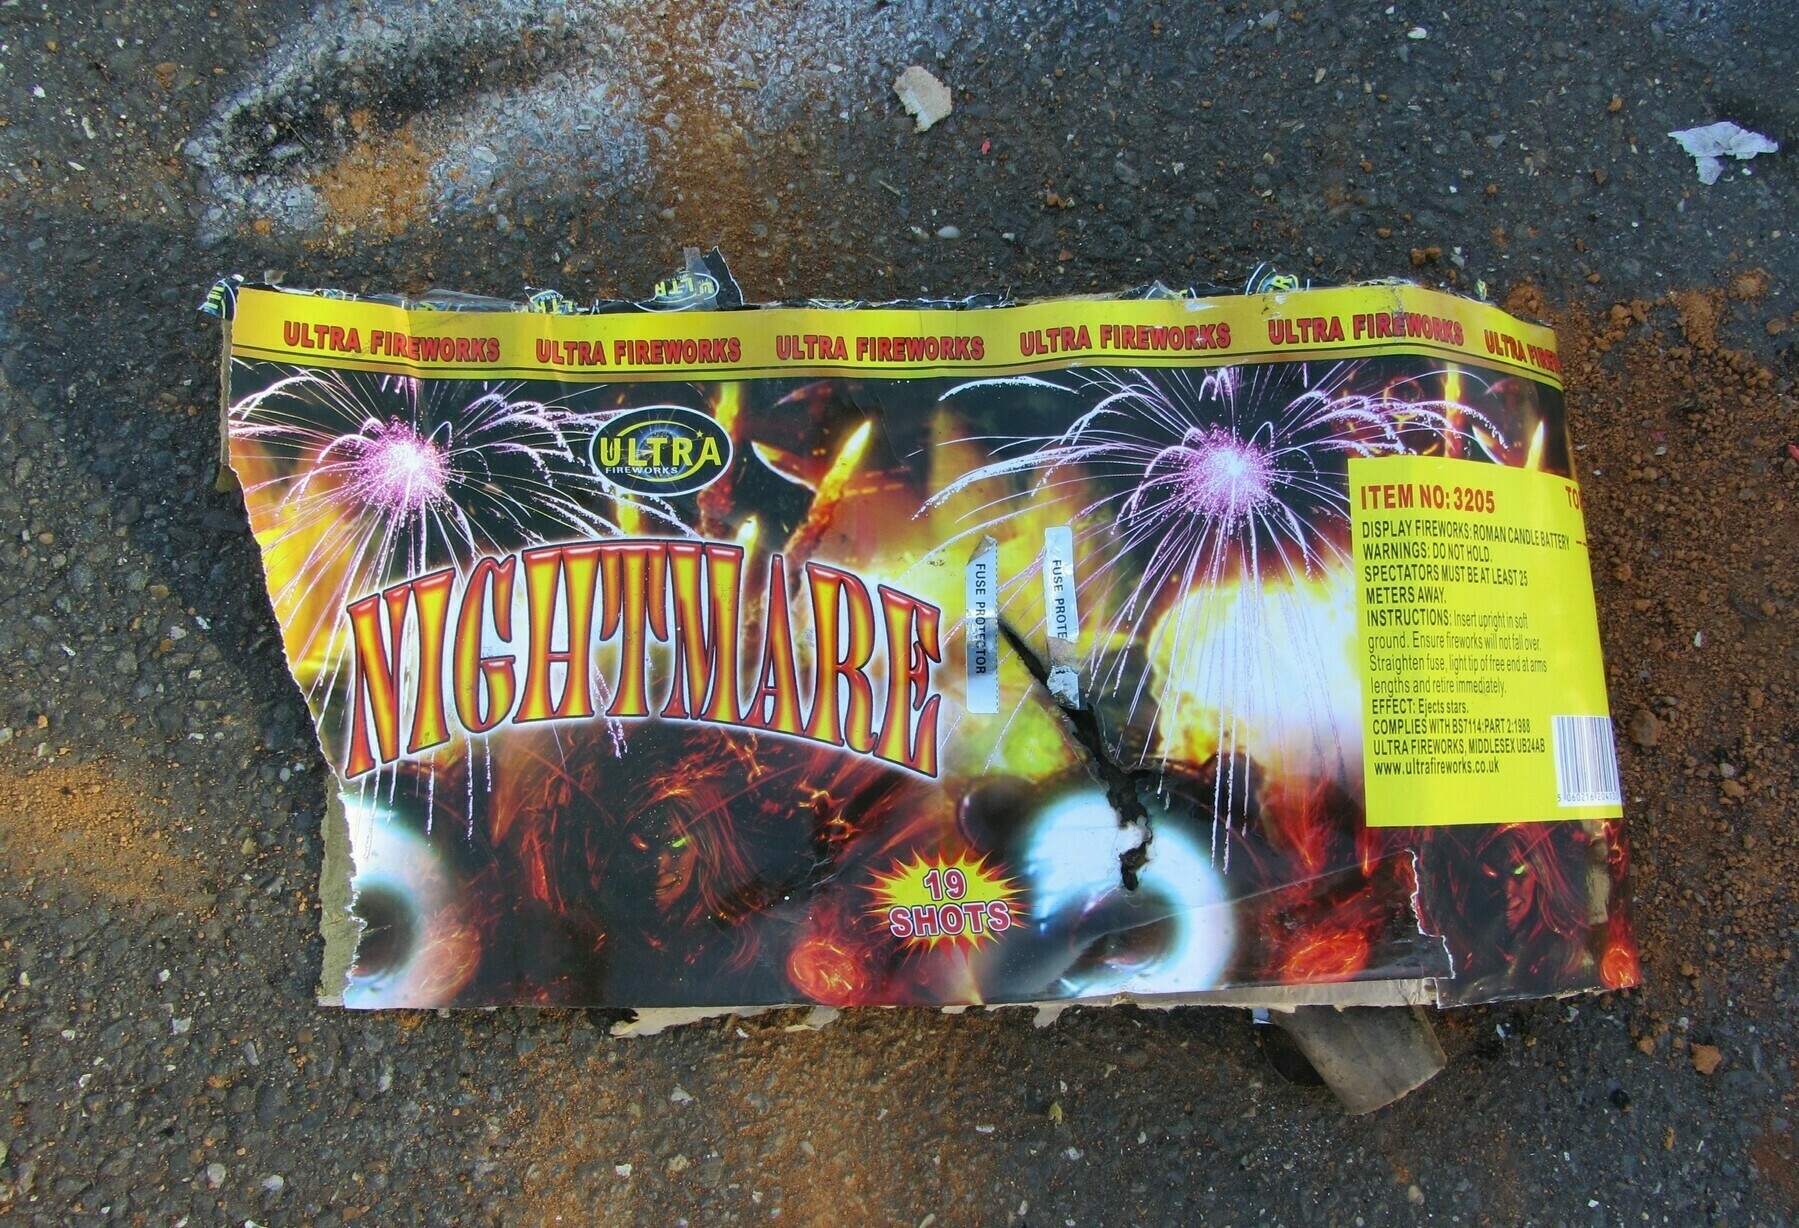 Colourful empty "Nightmare" fireworks case.